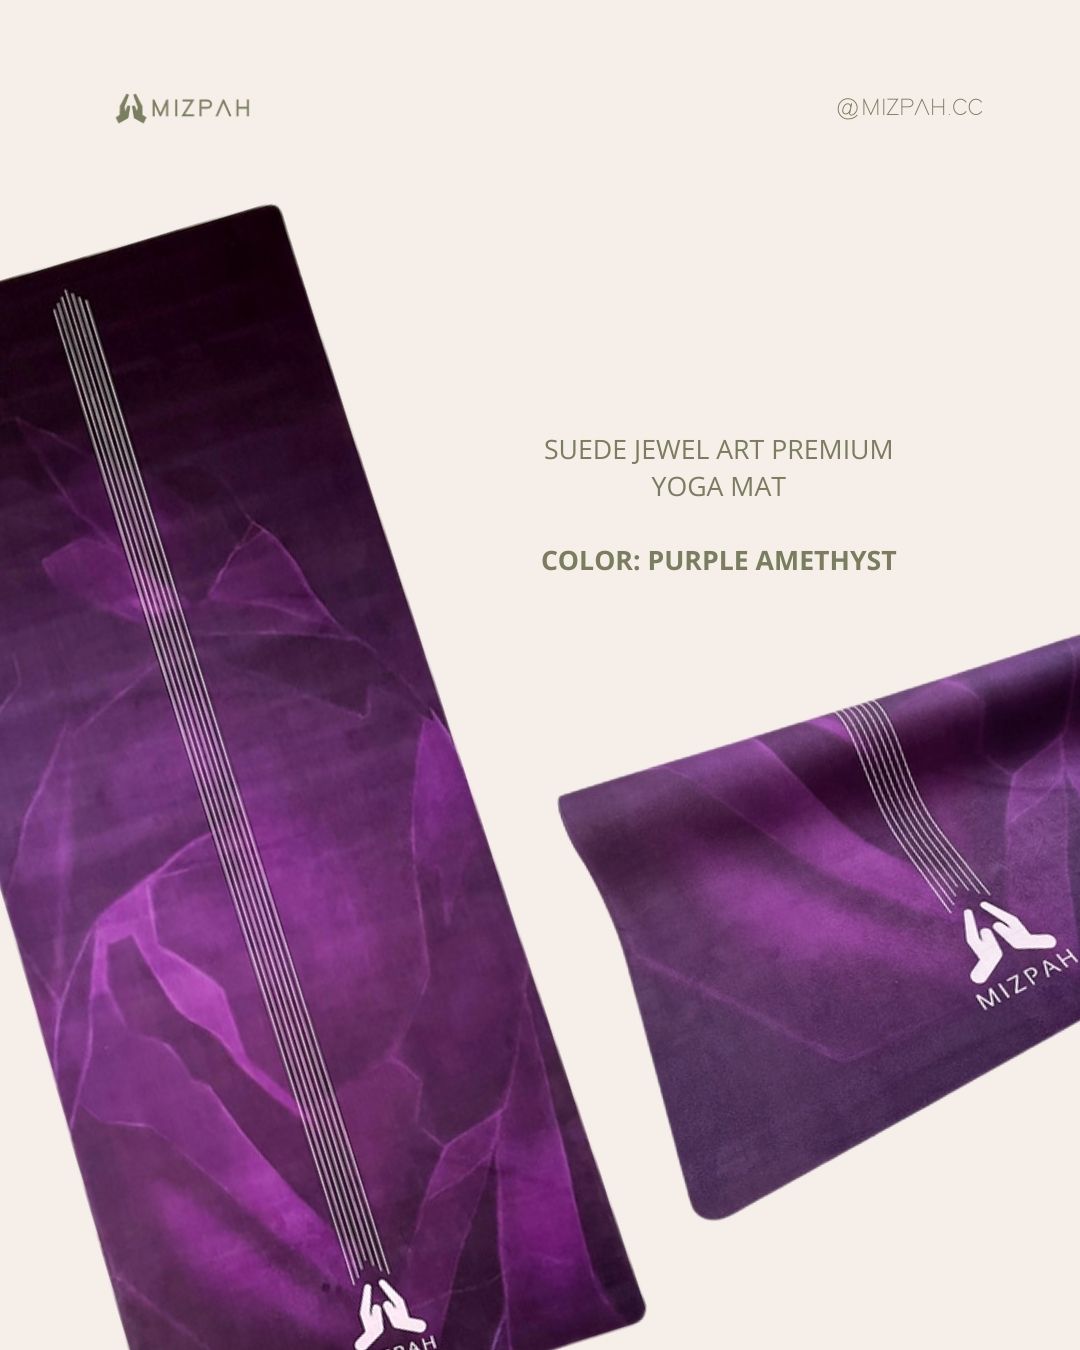 Suede Jewel Art Premium Yoga Mat is a Velvet-like finish and adheres best when there's moisture so it's ideal for intense workouts and hot yoga.